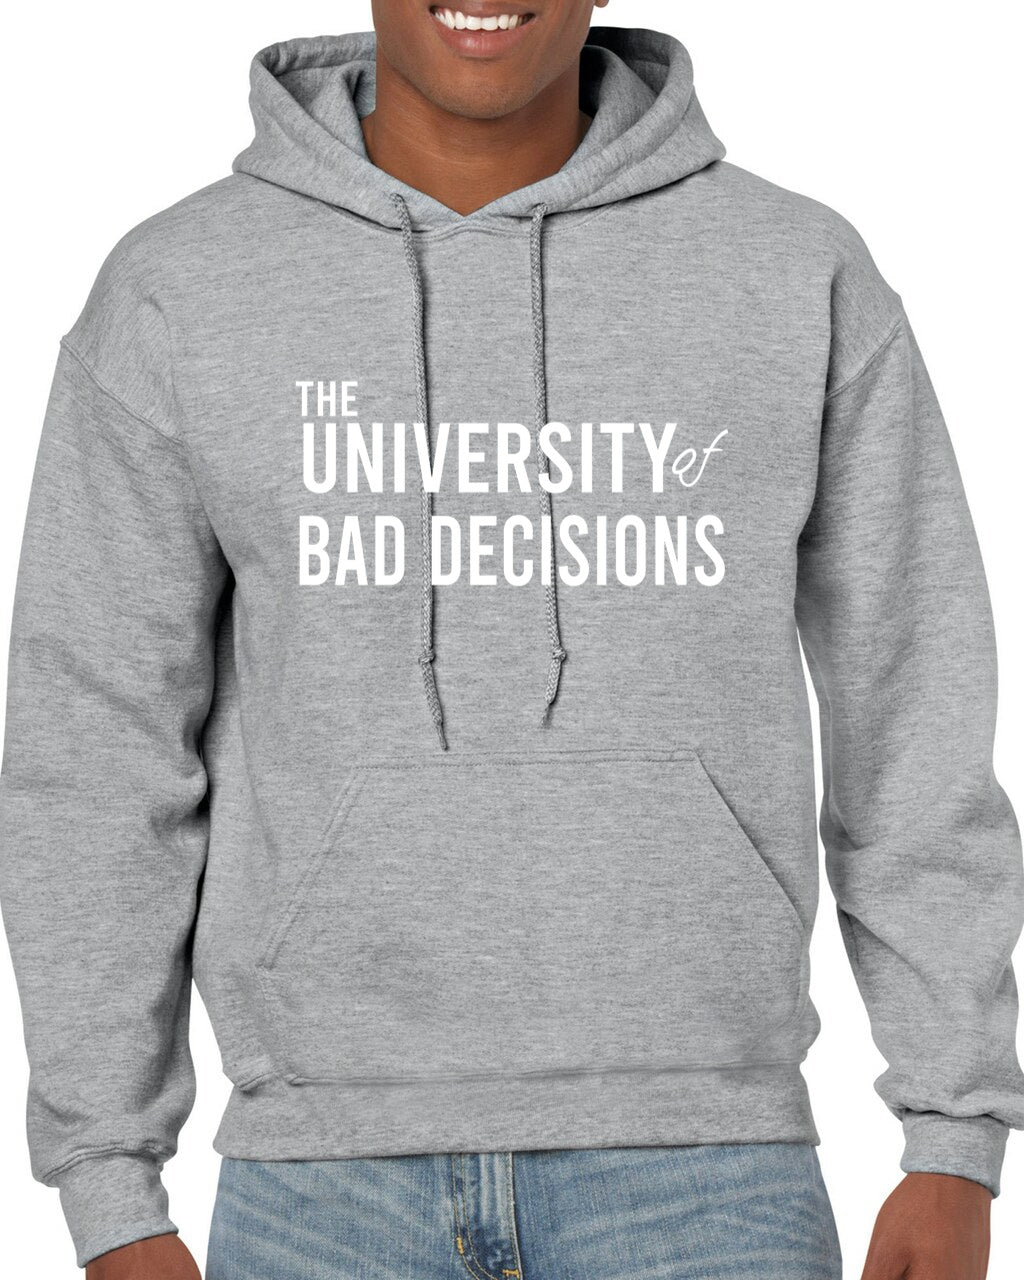 University of Louisville Official Distressed Primary Unisex Adult Pull-Over  Hoodie,White, Medium